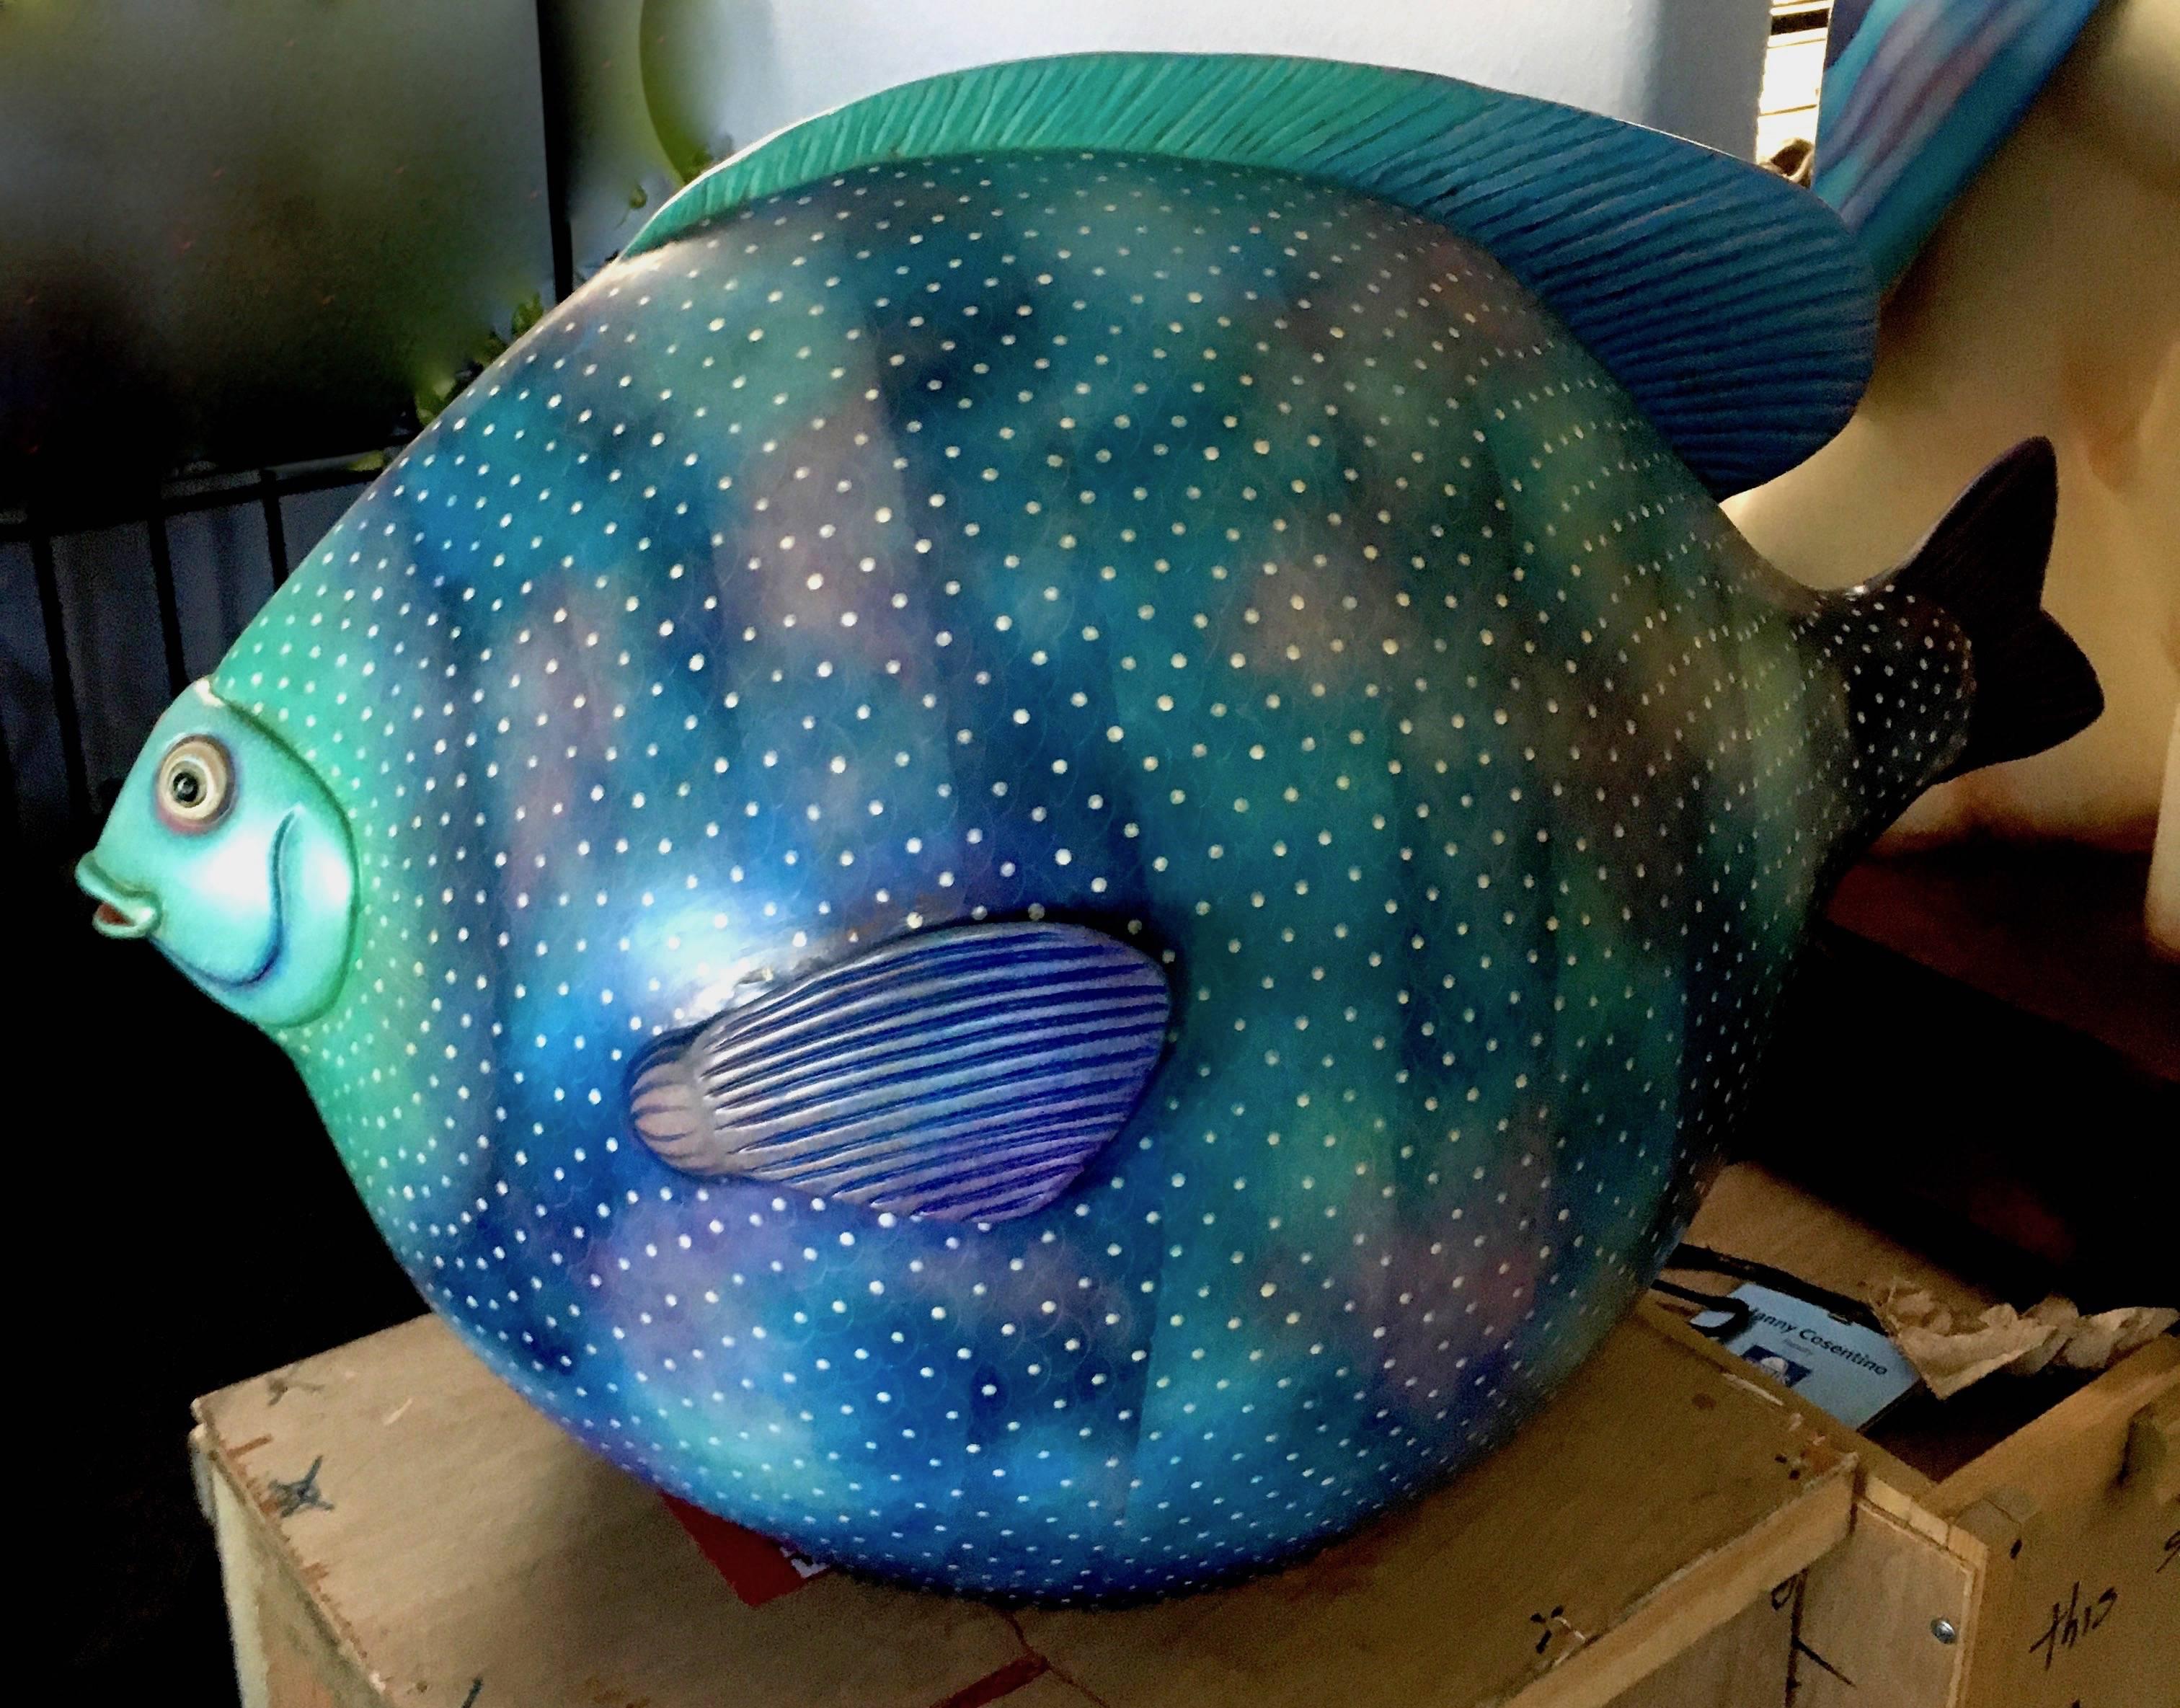 A lovely pair of signed ceramic fish by Mexican artist Sergio Bustamante. 

The captivating blue and green body of this fish is dappled with light and comes to an expressive fin and face. A whimsical addition to any room - perhaps best loved by